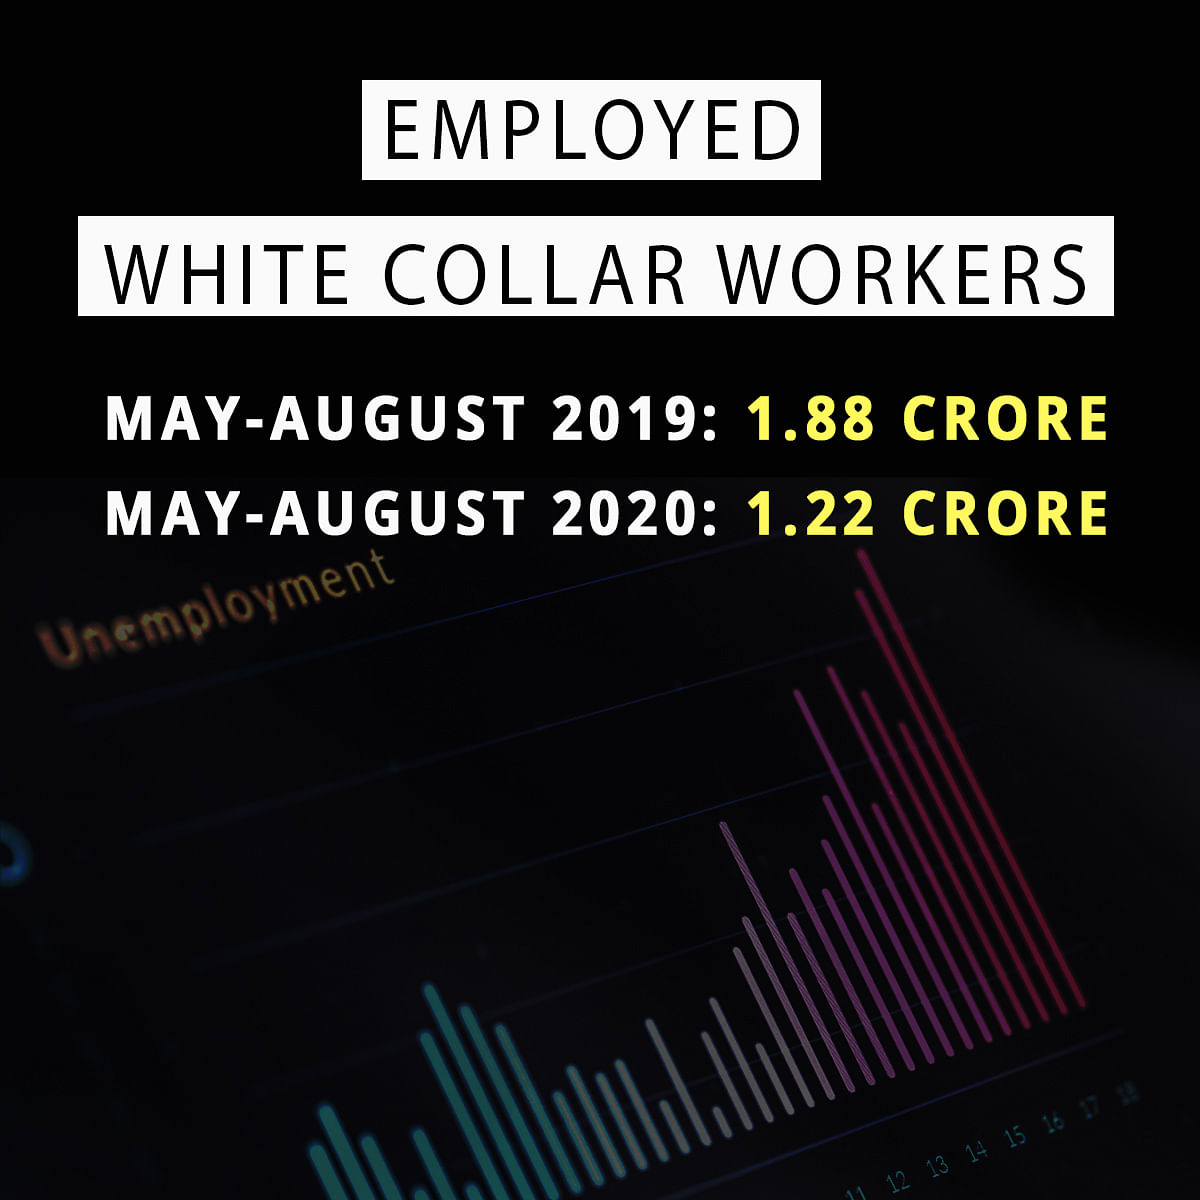 2.1 crore jobs lost during lockdown: Why did news channels ignore CMIE report while talking about Rhea and Kangana?